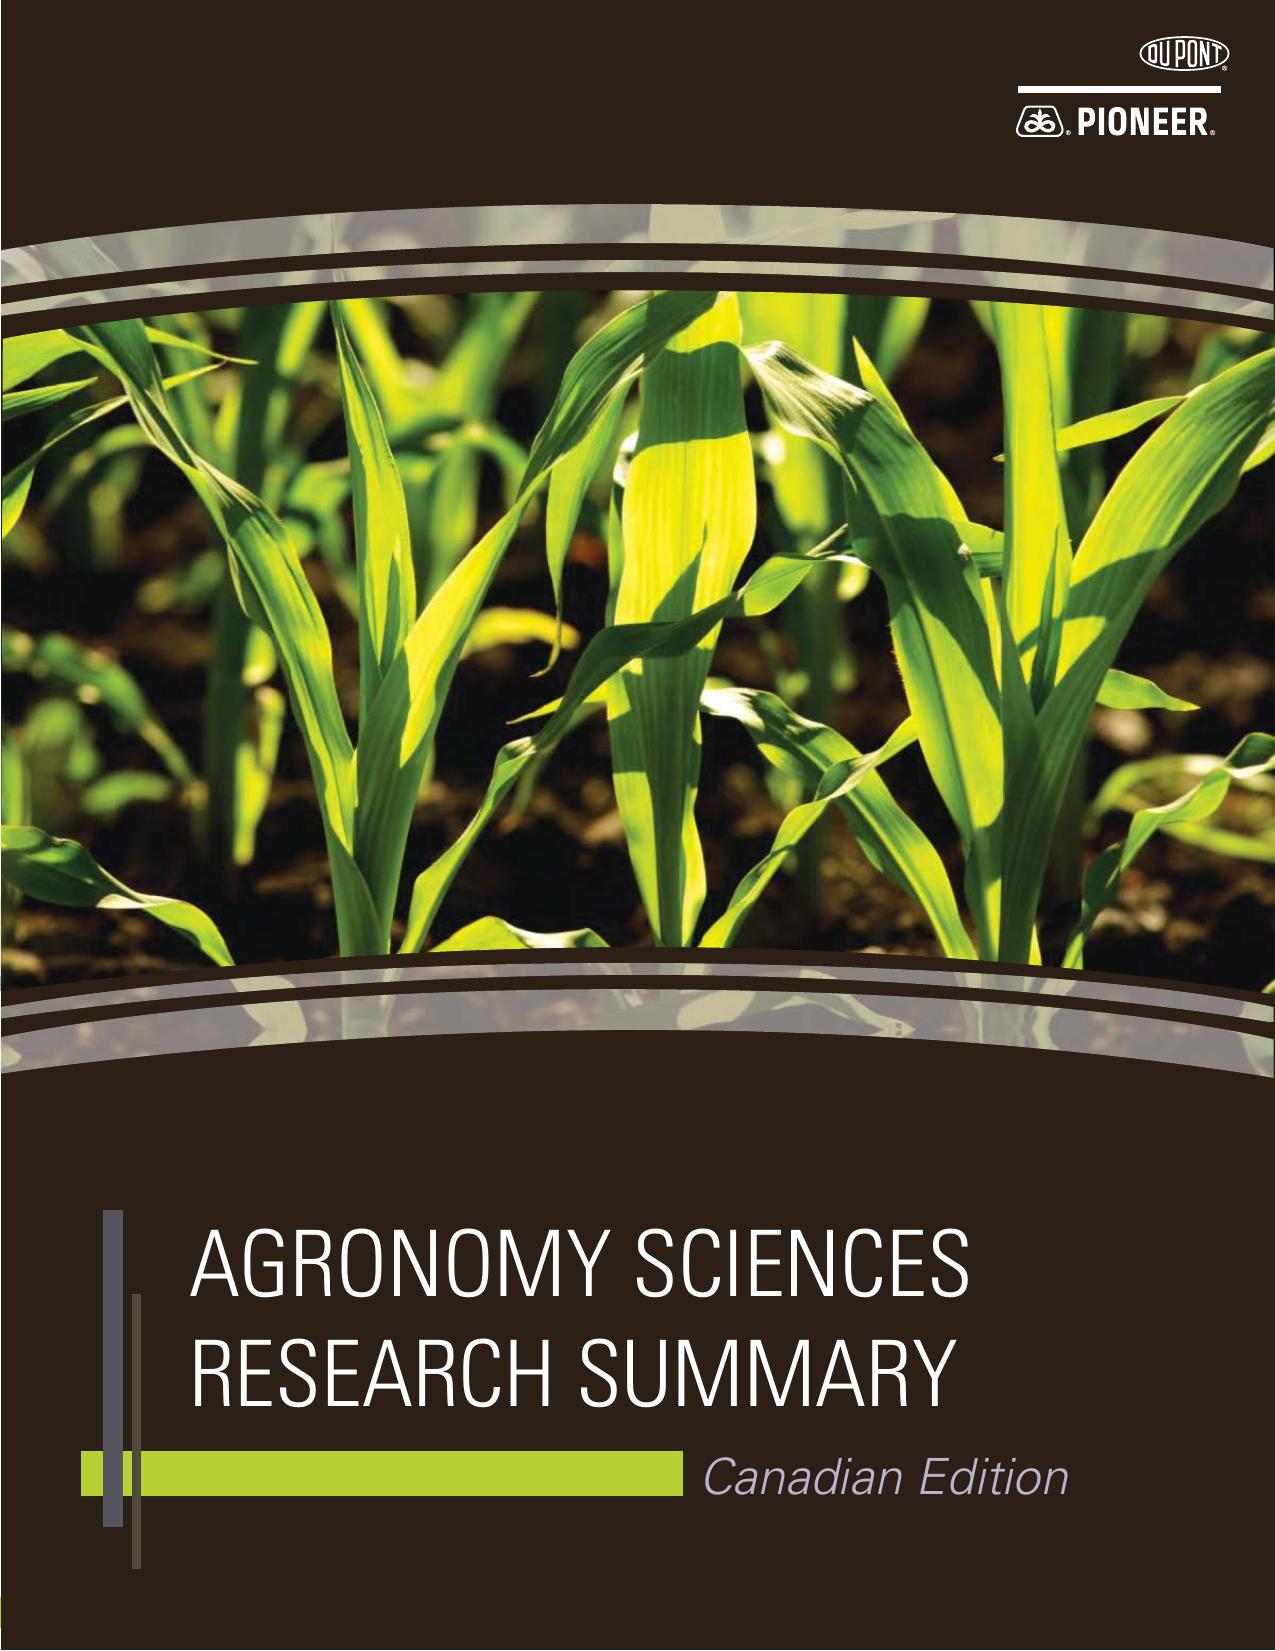 Agronomy Research Summary Book - Canadian Edition 2012